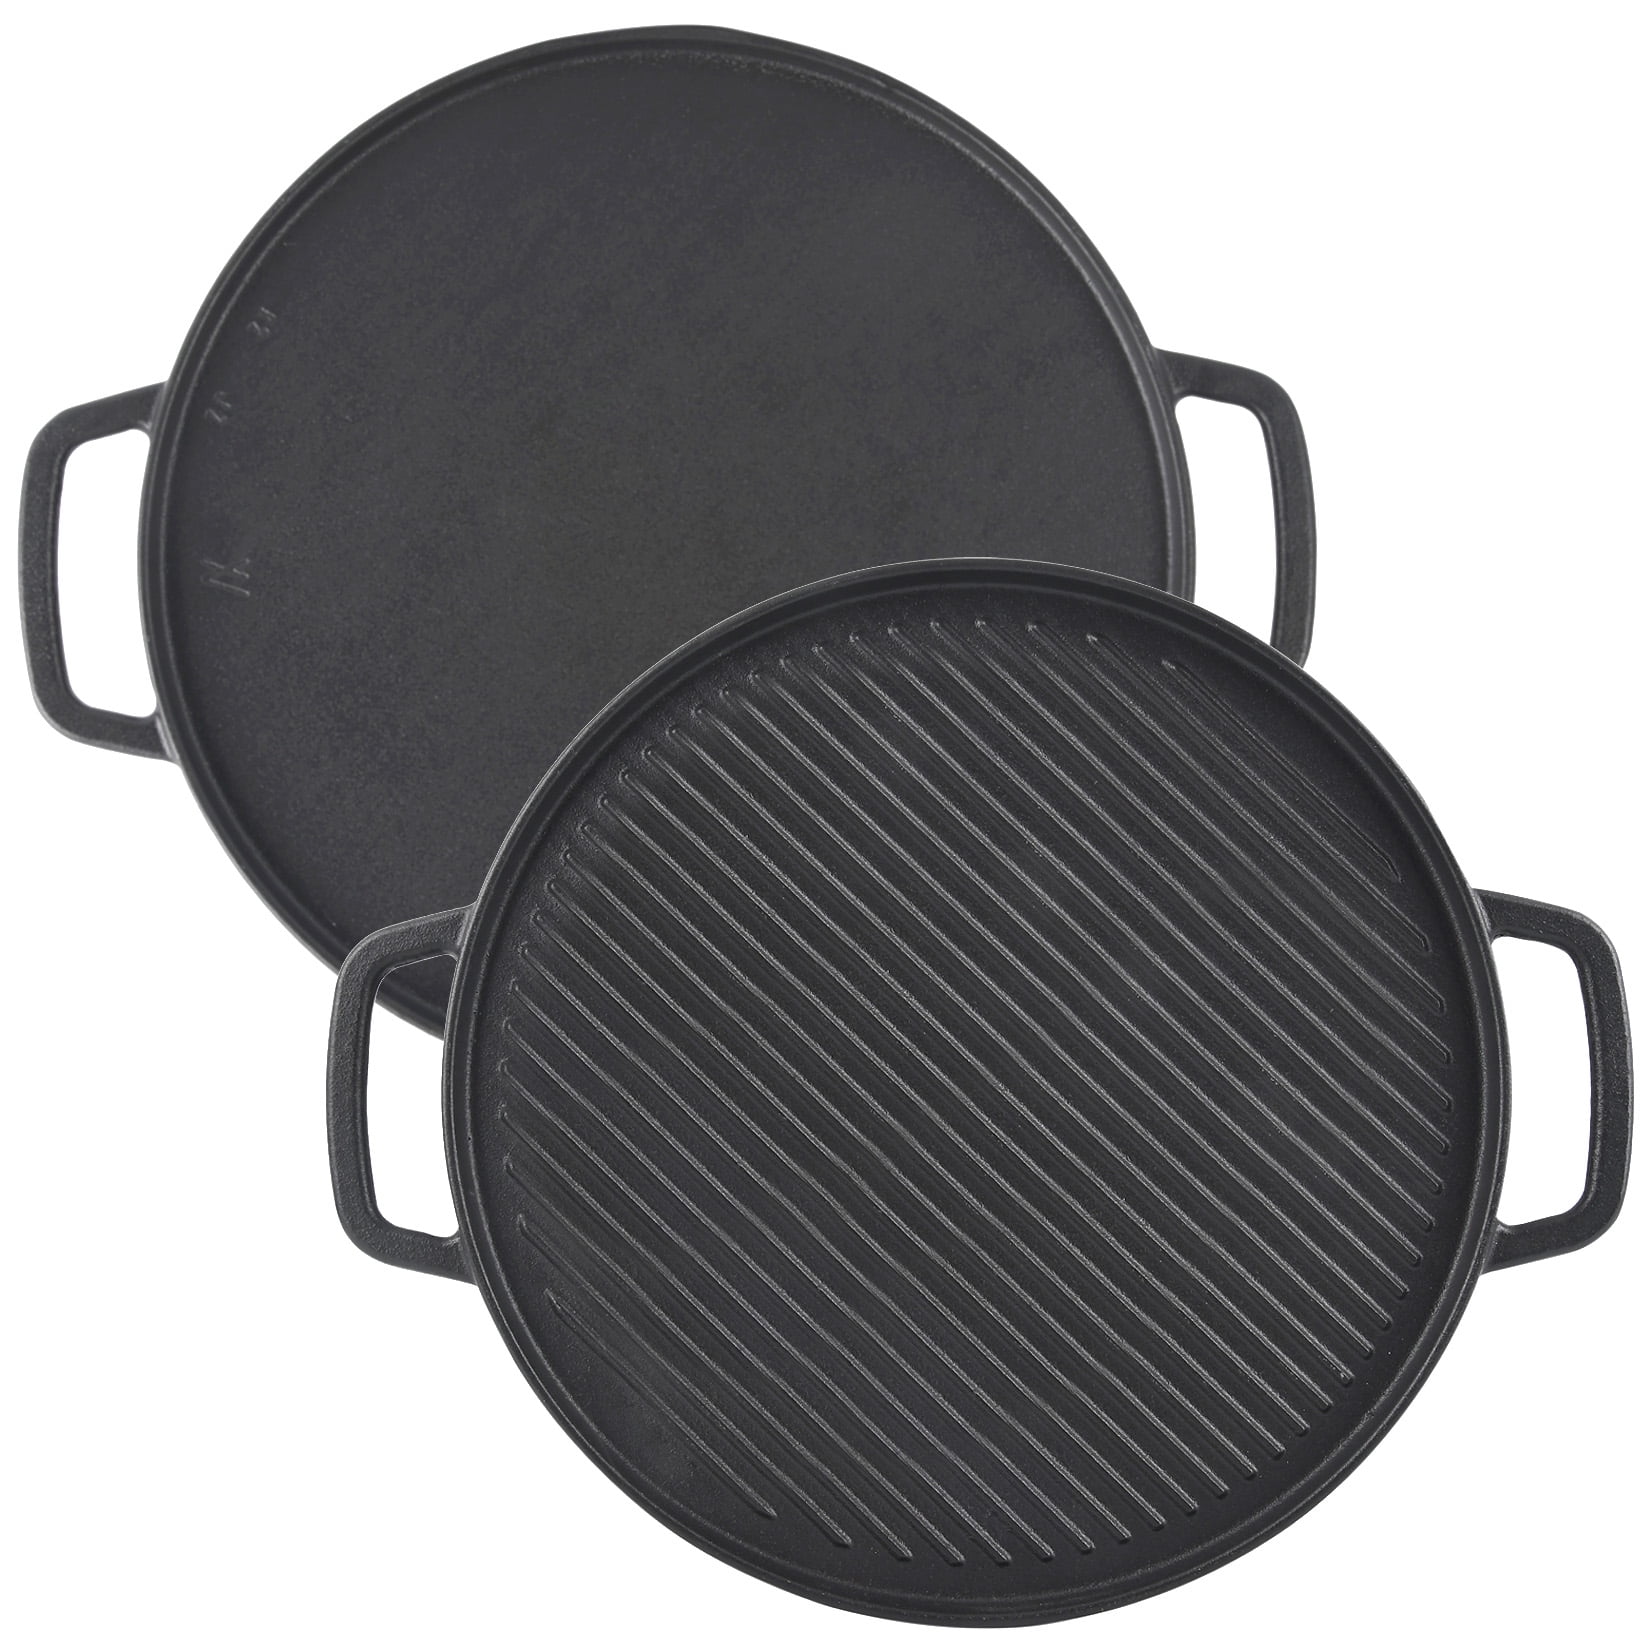 S·KITCHN Reversible Grill/Griddle Pan, Nonstick Stovetop Griddle for Gas  Stove,19.5” x 10.7